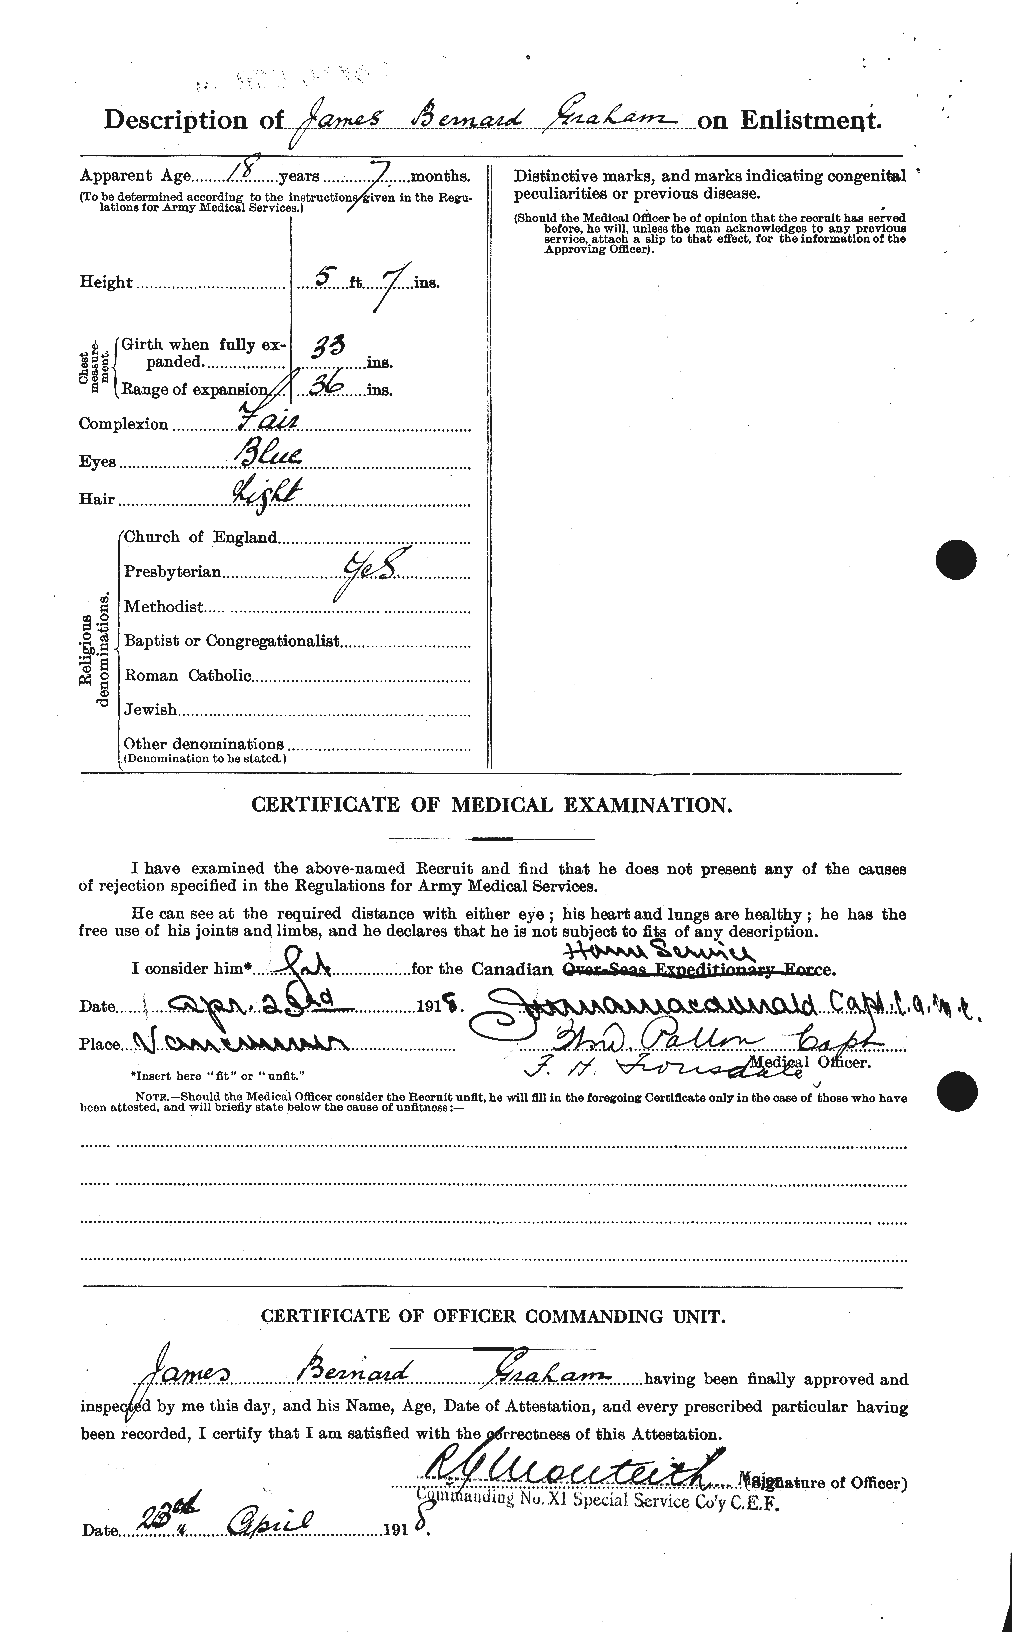 Personnel Records of the First World War - CEF 357807b